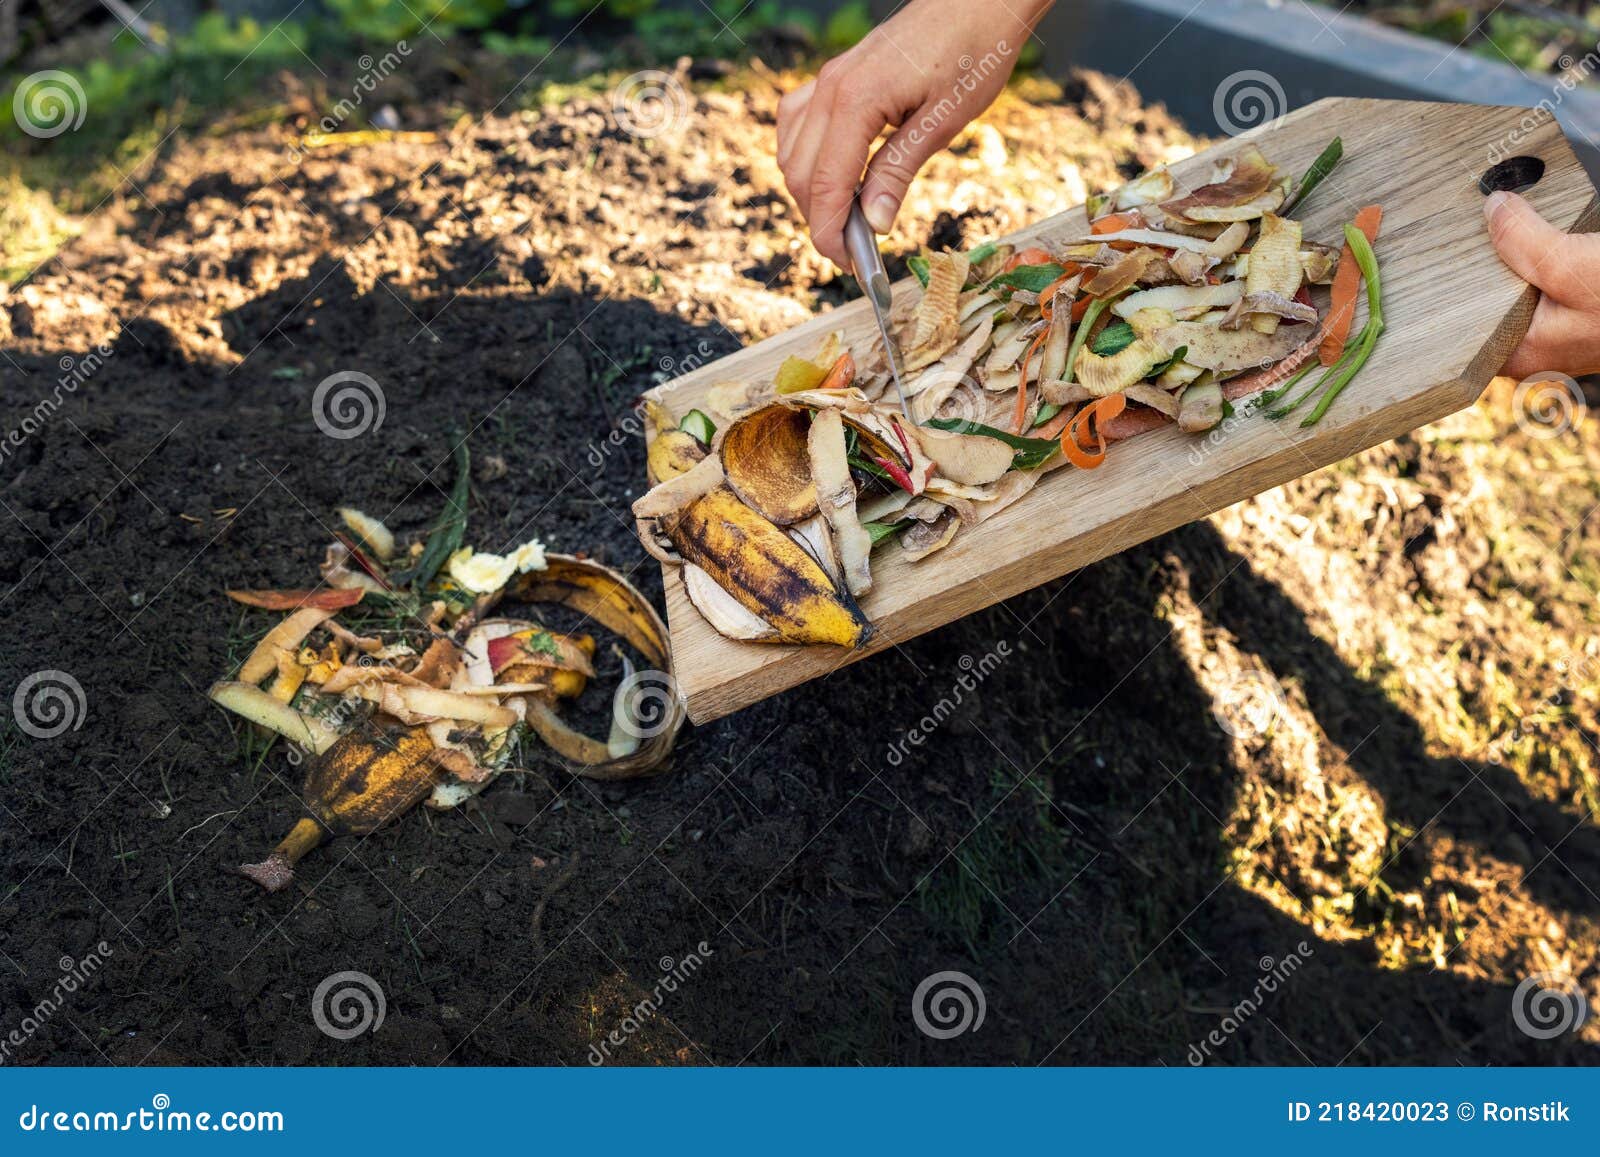 throwing food leftovers in garden compost pile. recycling organic kitchen waste